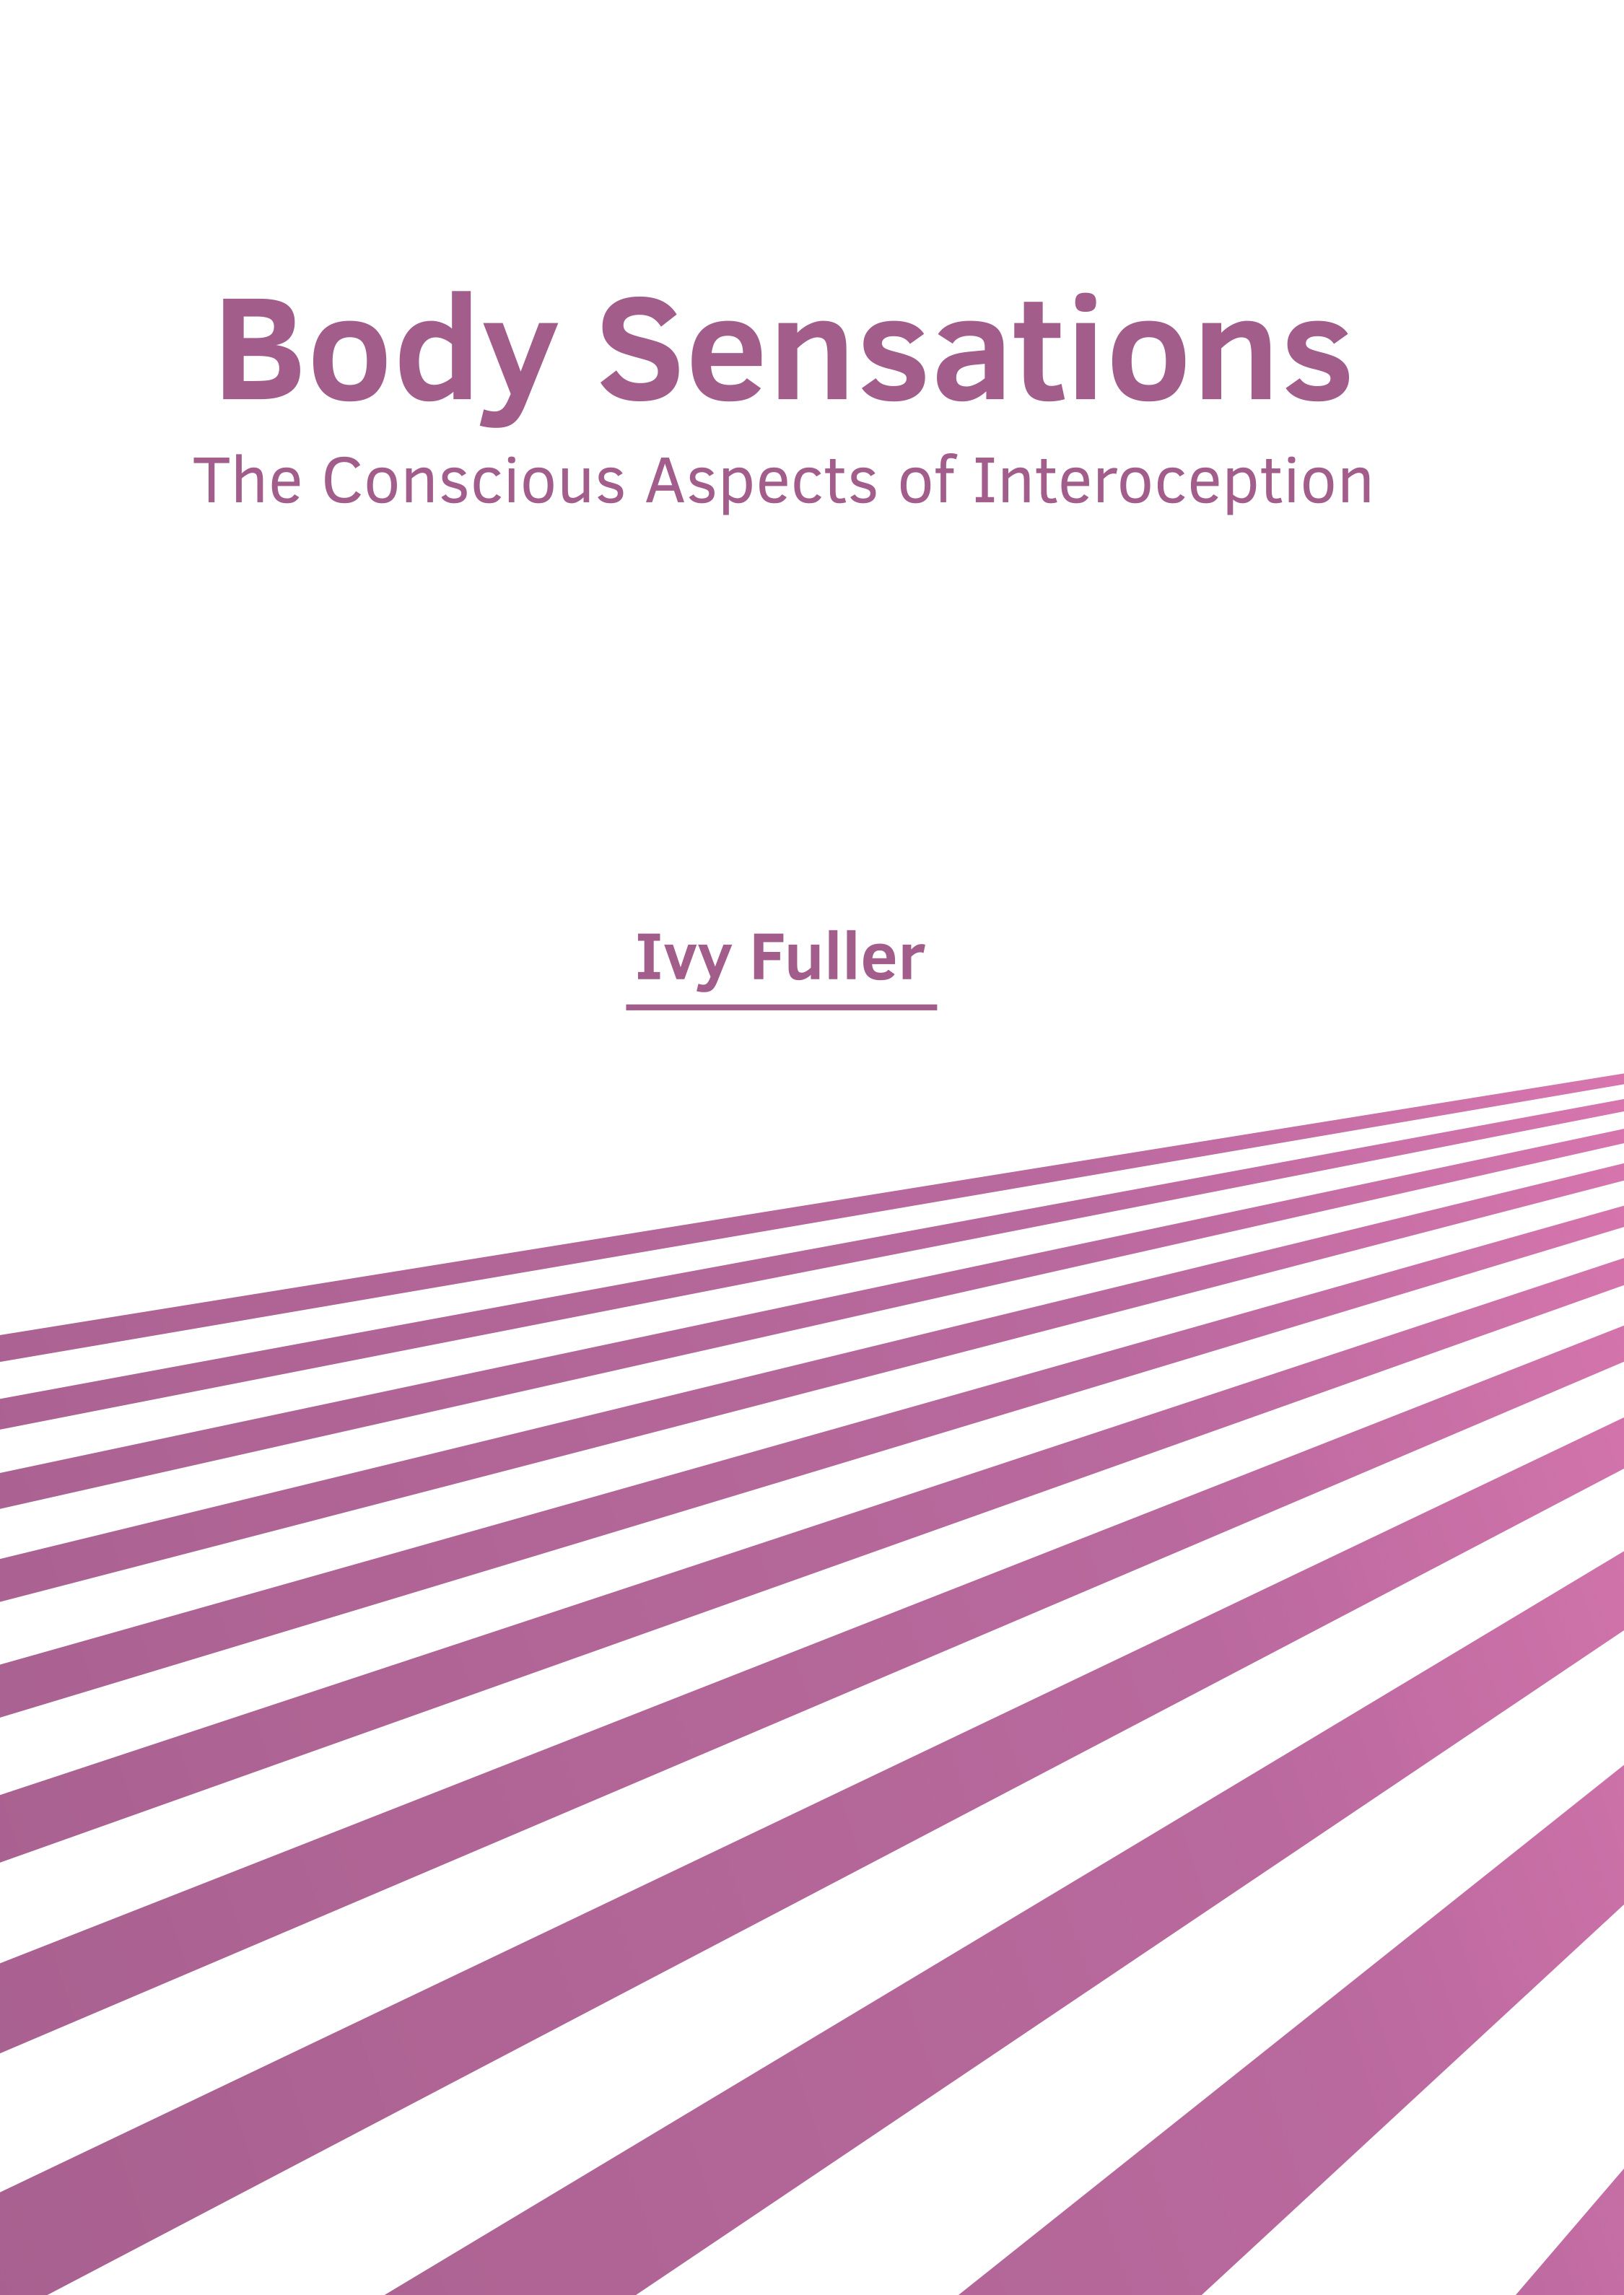 BODY SENSATIONS: THE CONSCIOUS ASPECTS OF INTEROCEPTION